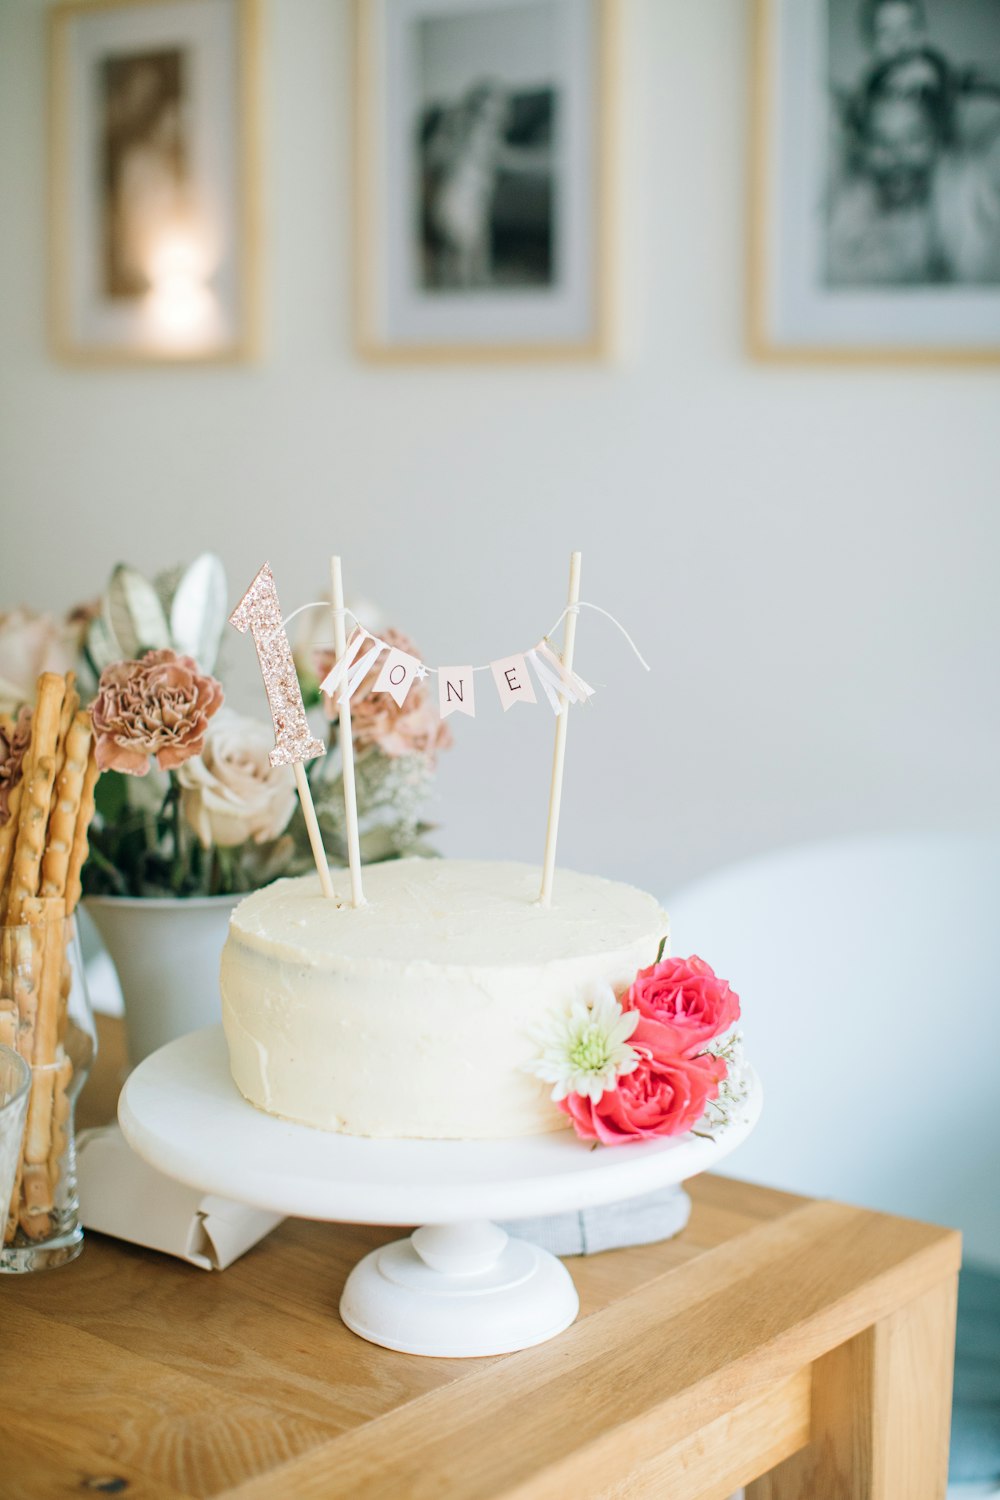 a white cake sitting on top of a wooden table